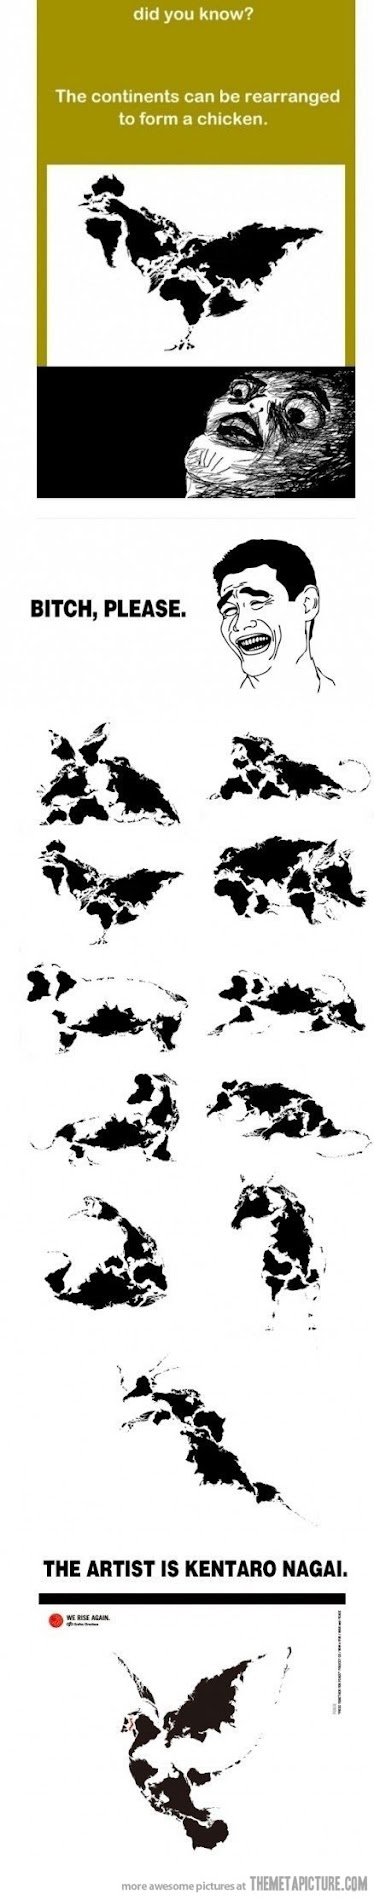 rearranging the continents